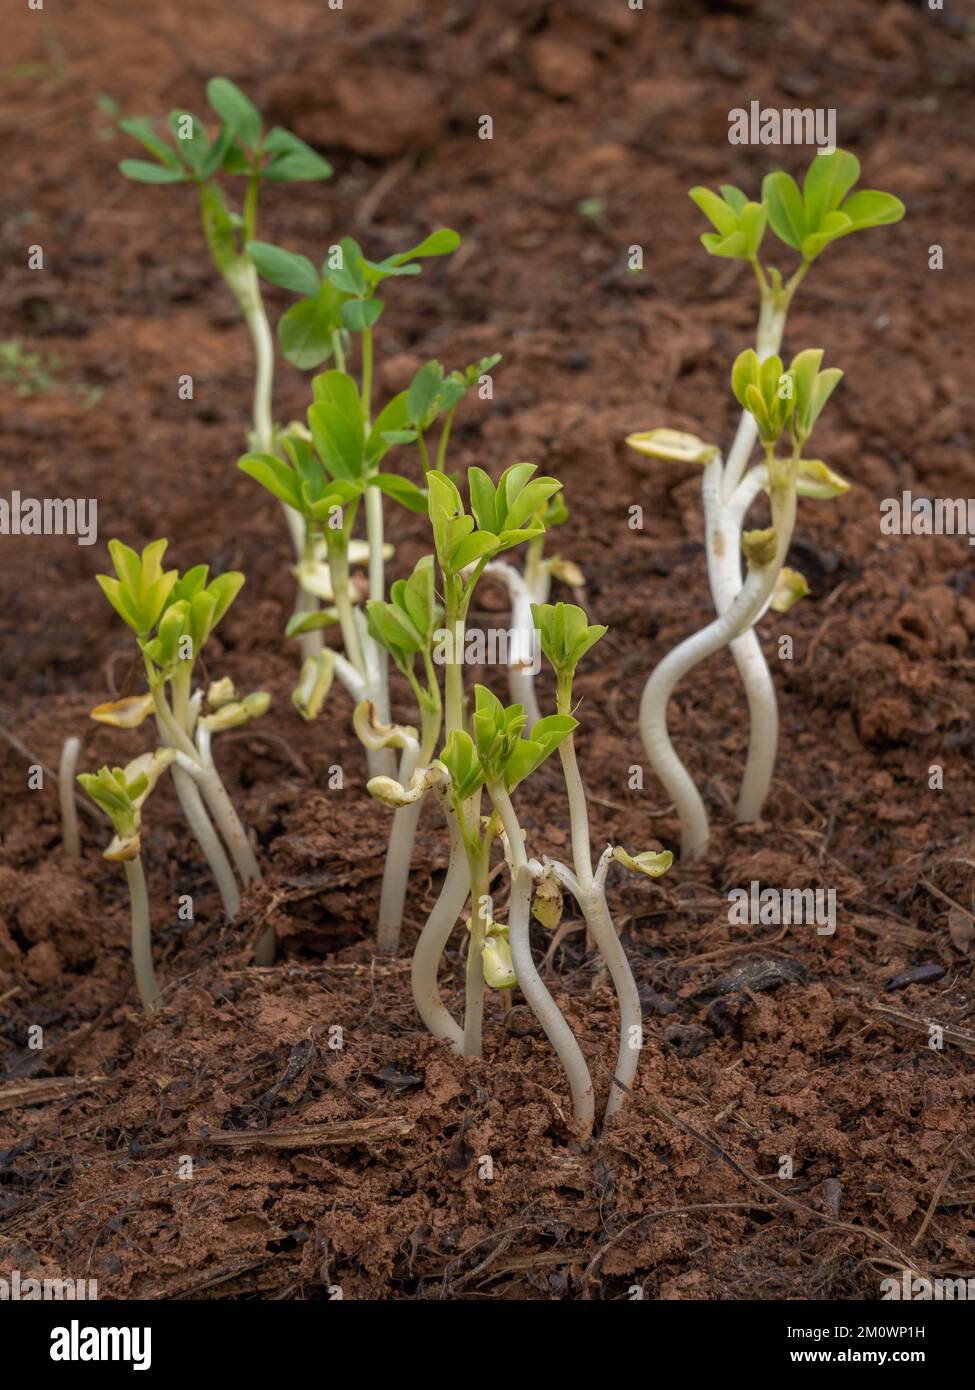 Closeup view of fresh young peanut aka arachis hypogaea shoots growing in field after harvest Stock Photo